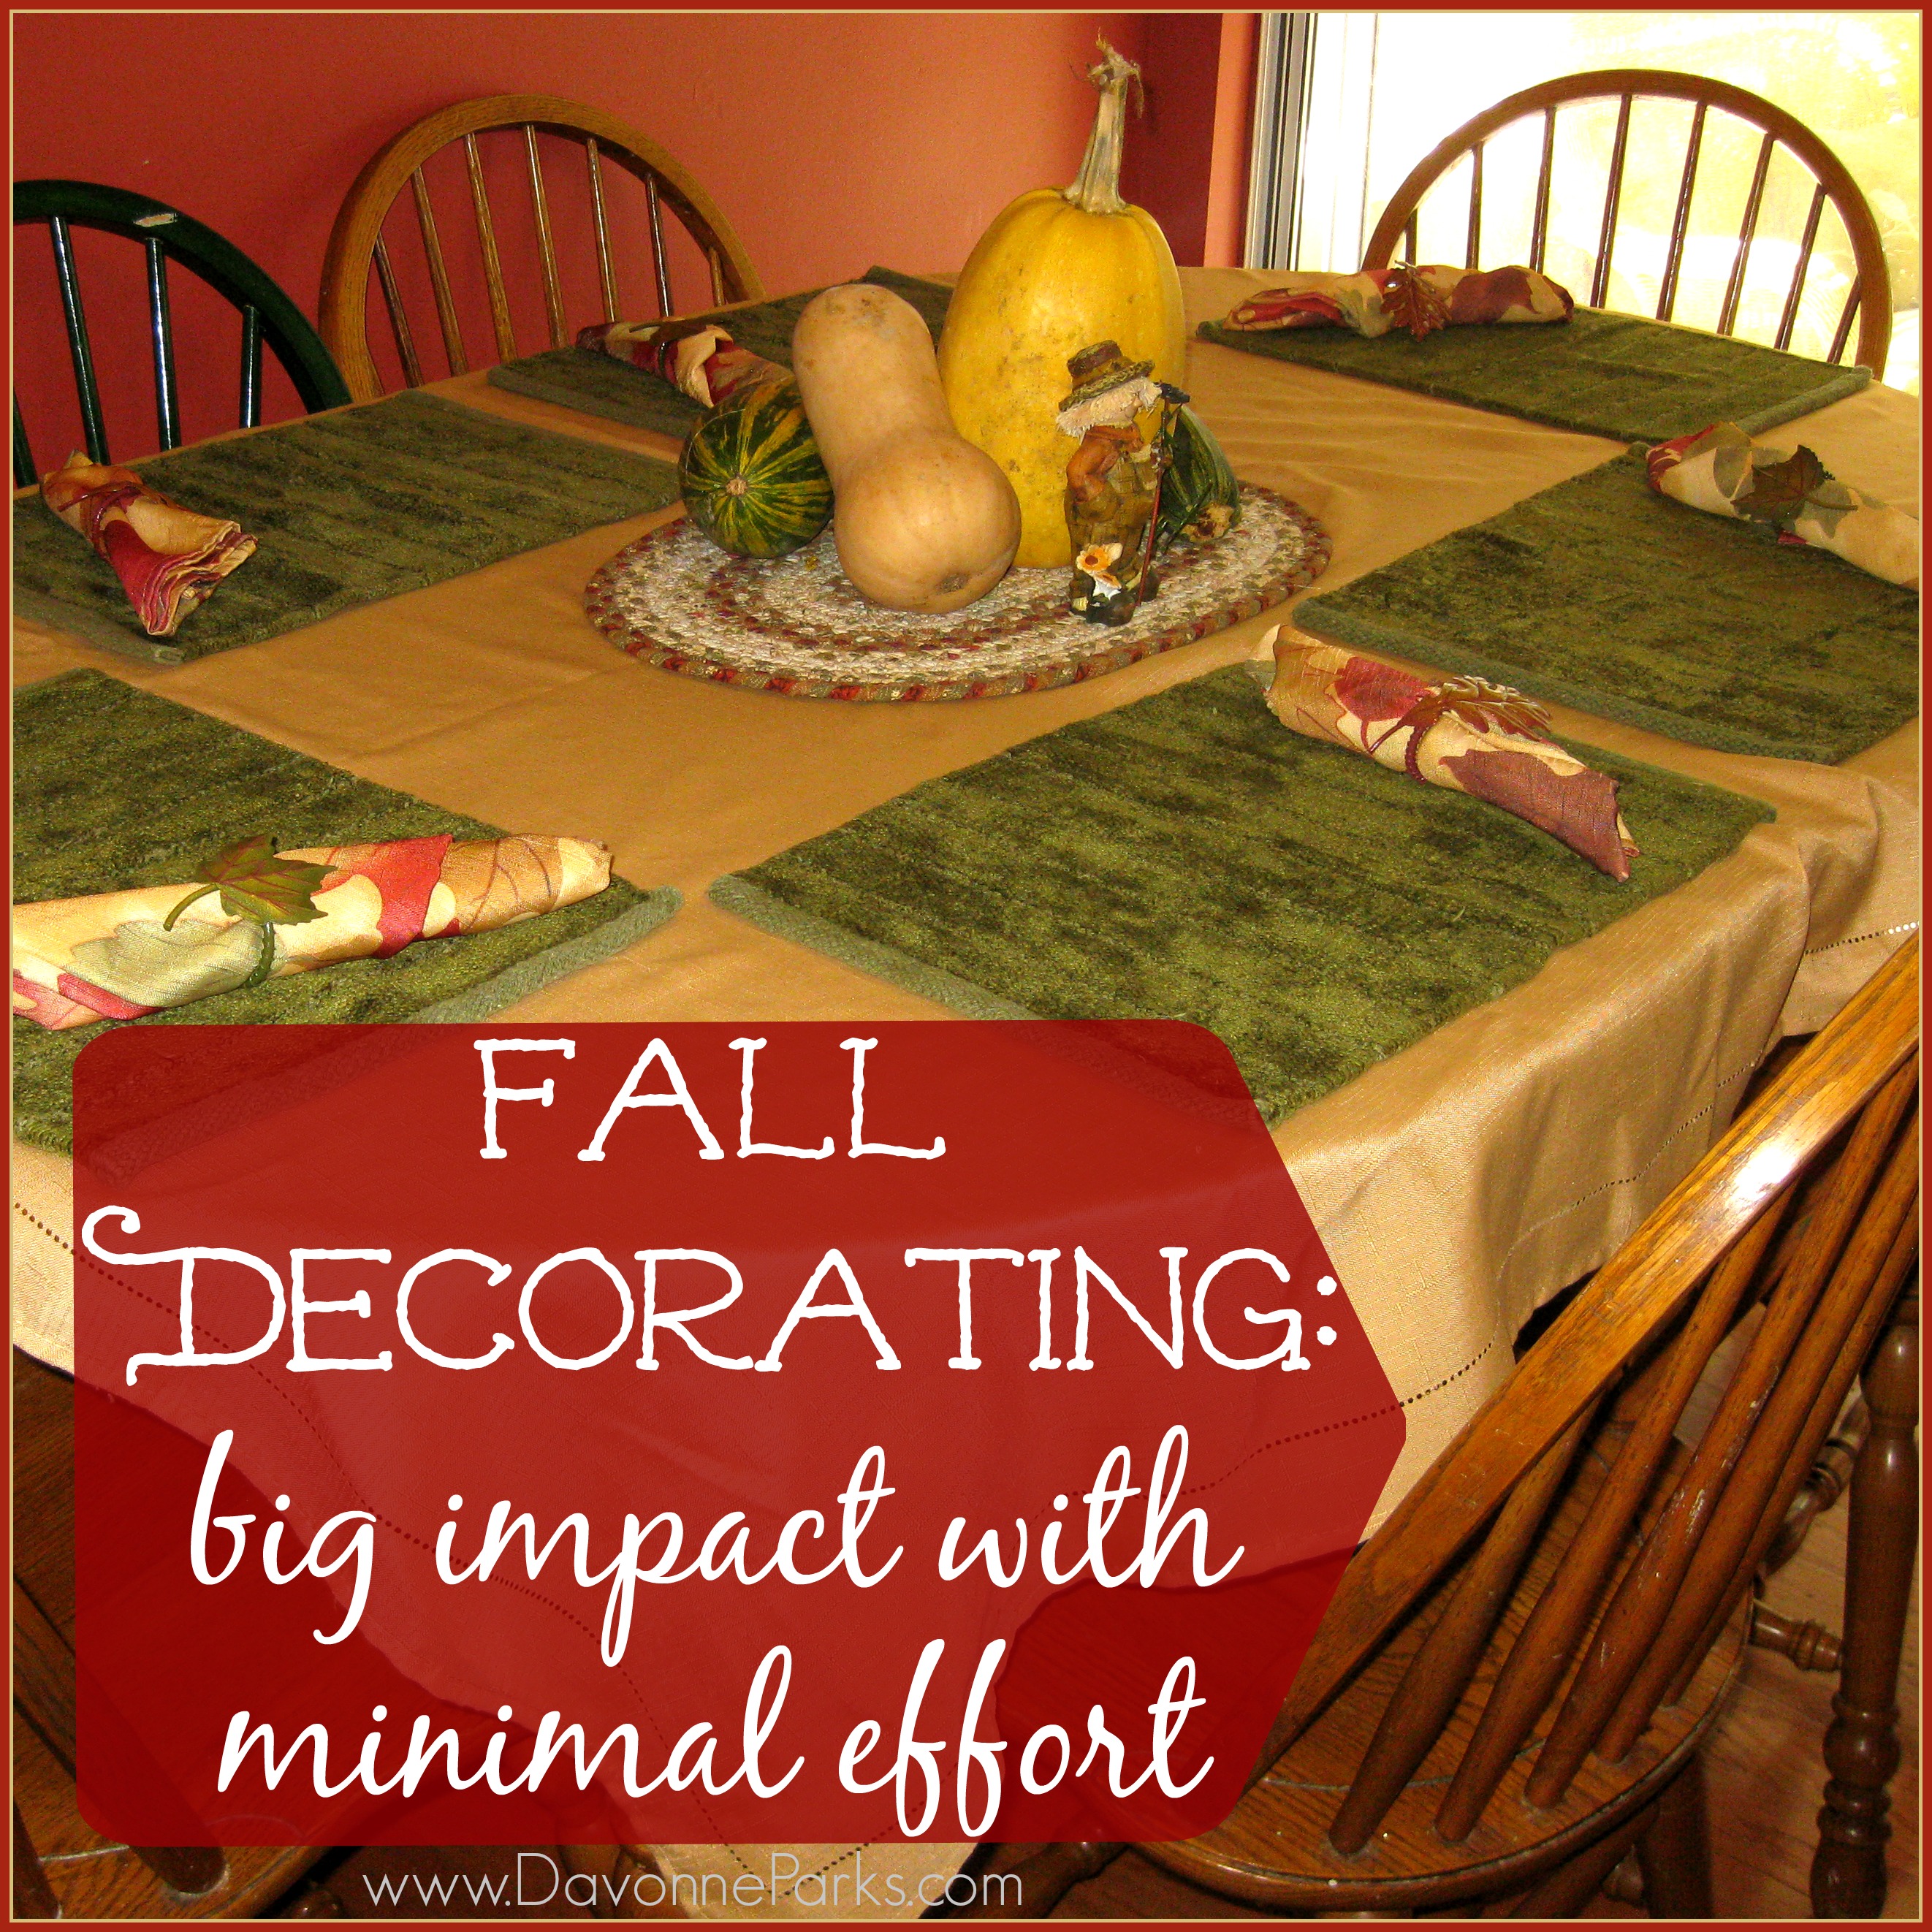 Six simple ways to invite fall into your home